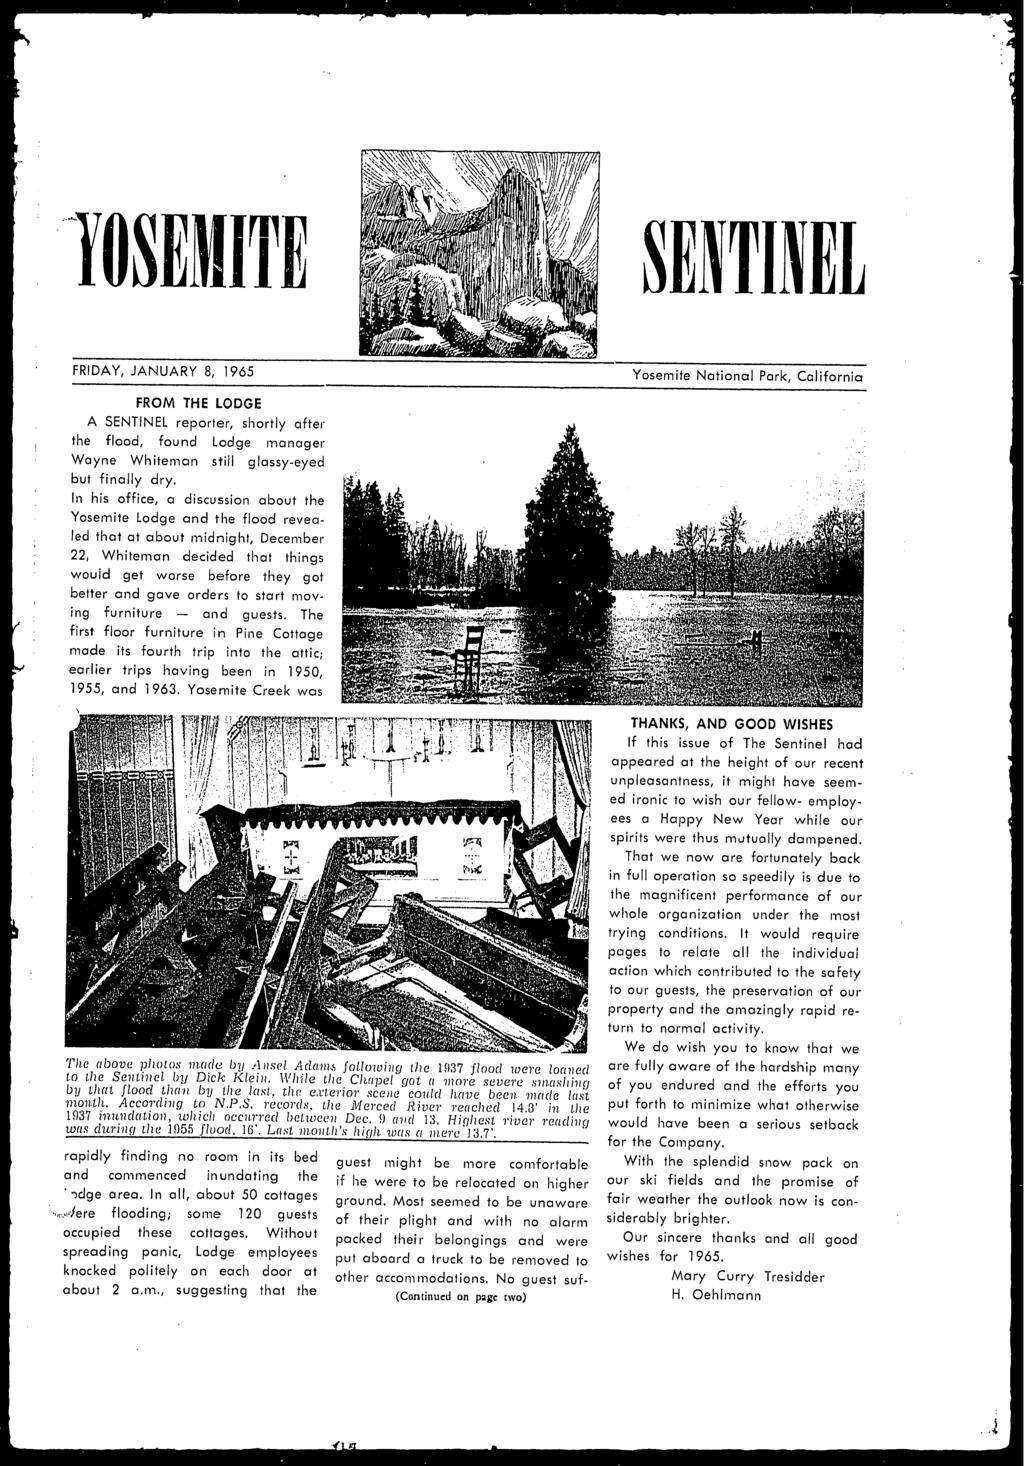 SENTINEL FRIDAY, JANUARY 8, 1965 Yosemte Natonal Park, Calforna FROM THE LODGE A SENTINEL reporter, shortly after the flood, found Lodge manager Wayne Whteman stll glassy-eyed but fnally dry.